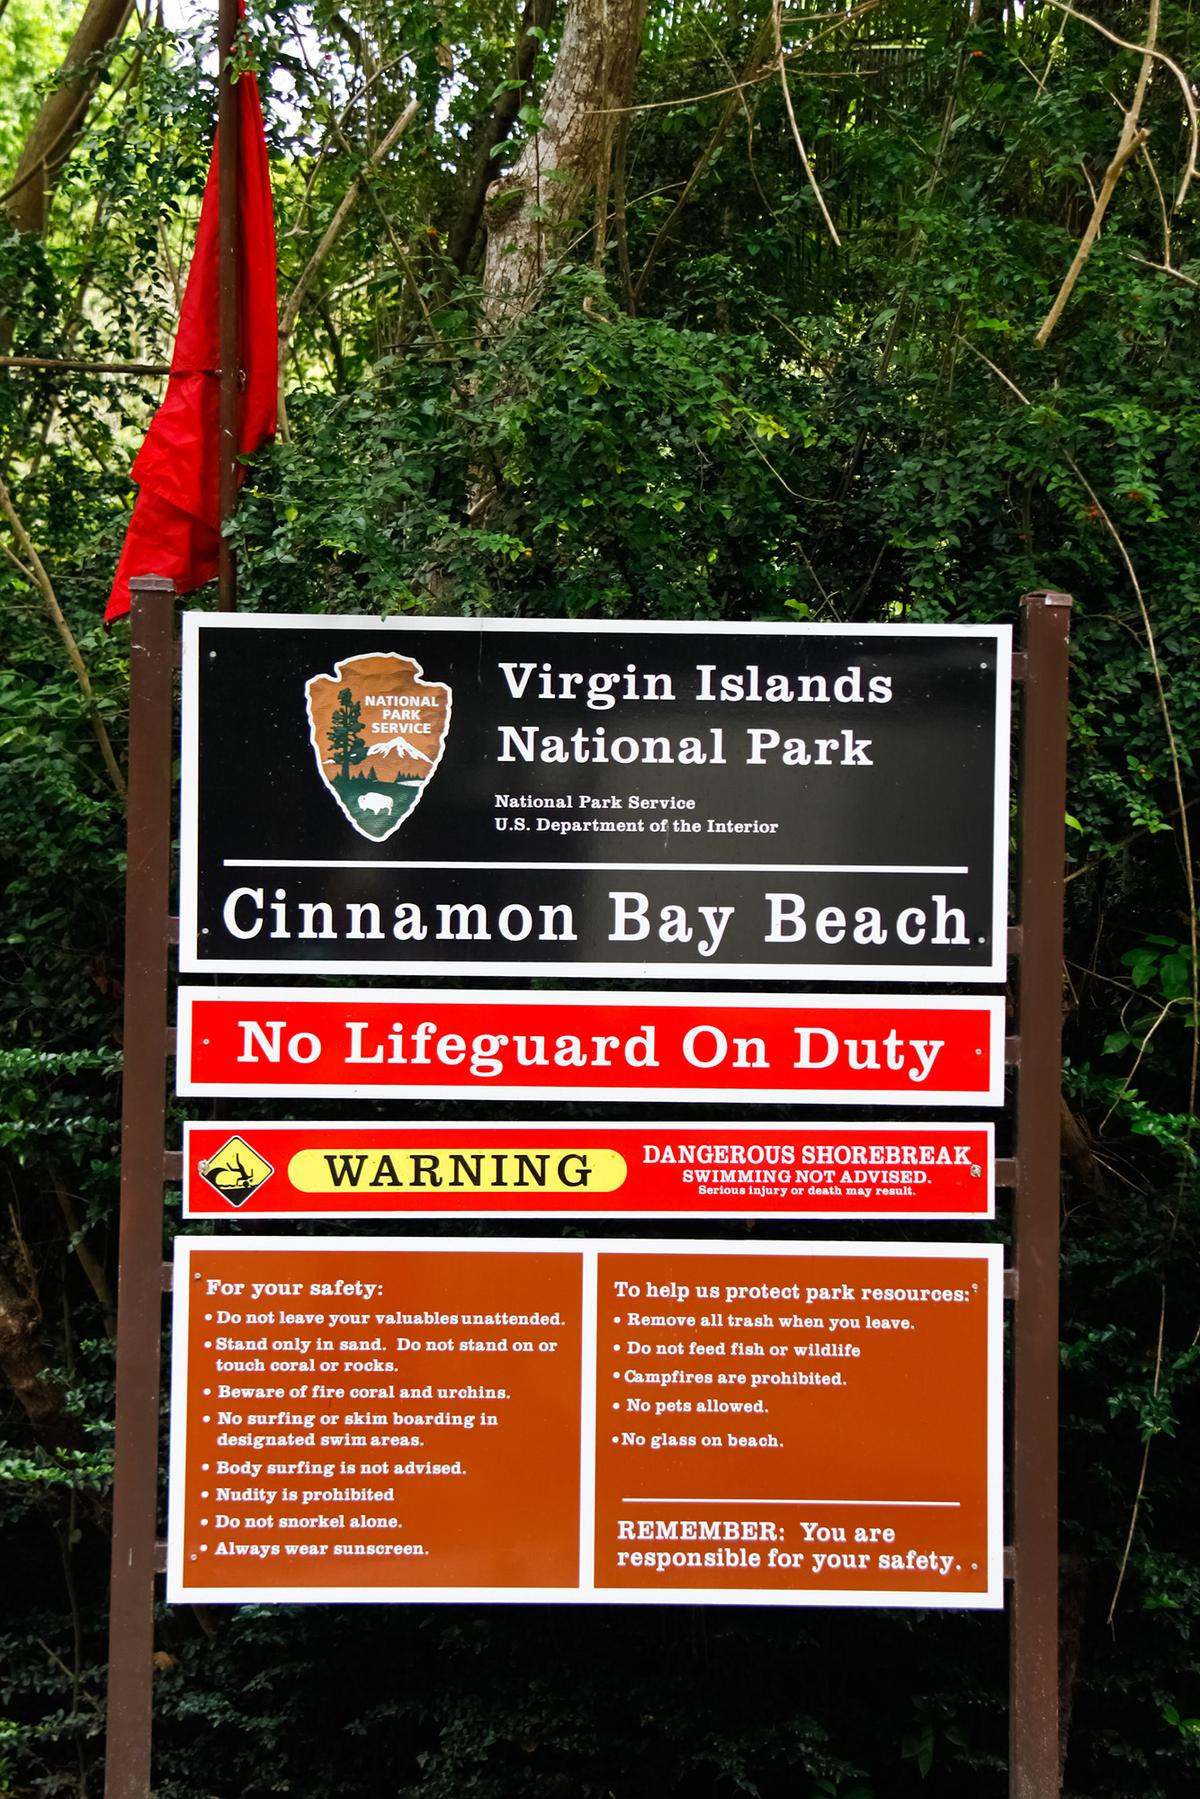 A sign greets visitors as they enter Cinnamon Bay Beach in the Virgin Islands National Park on the island of St. John. It also shows a Red Flag warning for high surf conditions.(Lawrence Weslowski Jr./Dreamstime/TNS)